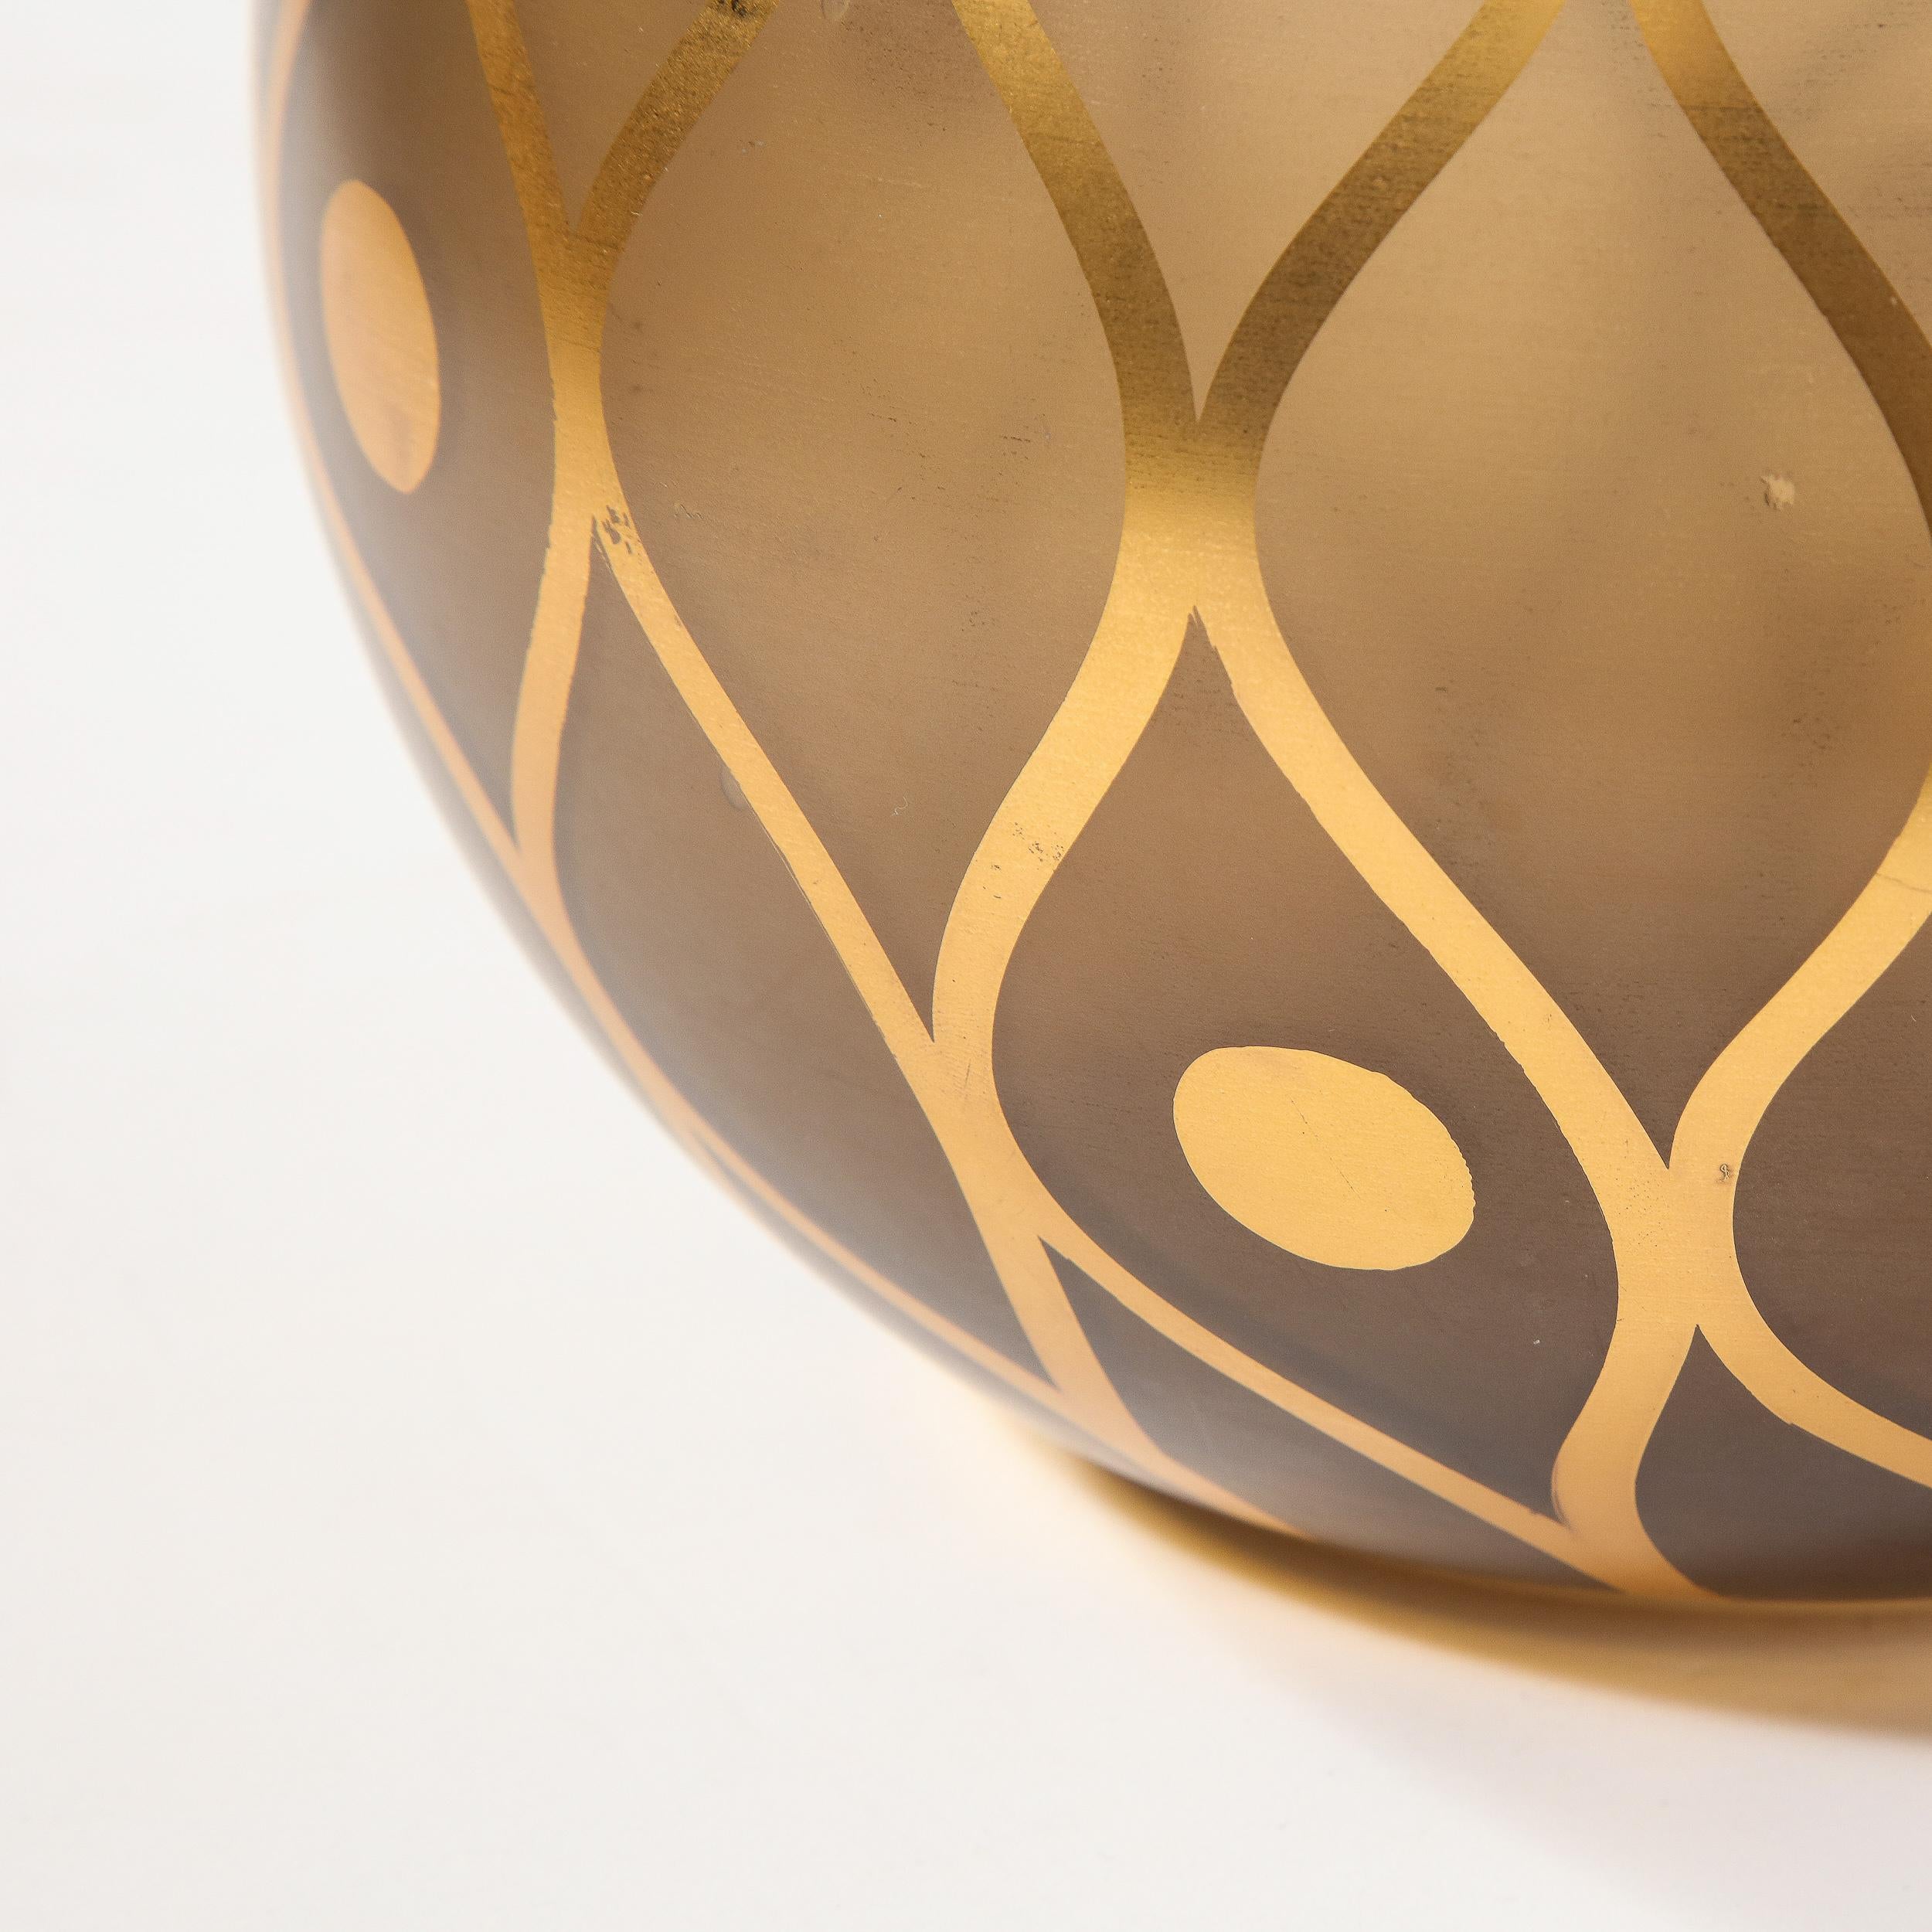 This sophisticated Mid-Century Modern vase was realized in France, circa 1960. It offers a spherical glass body in a rich smoked bronze hue. The exterior of the piece is adorned with curvilinear detailing- undulating lines that meet to create